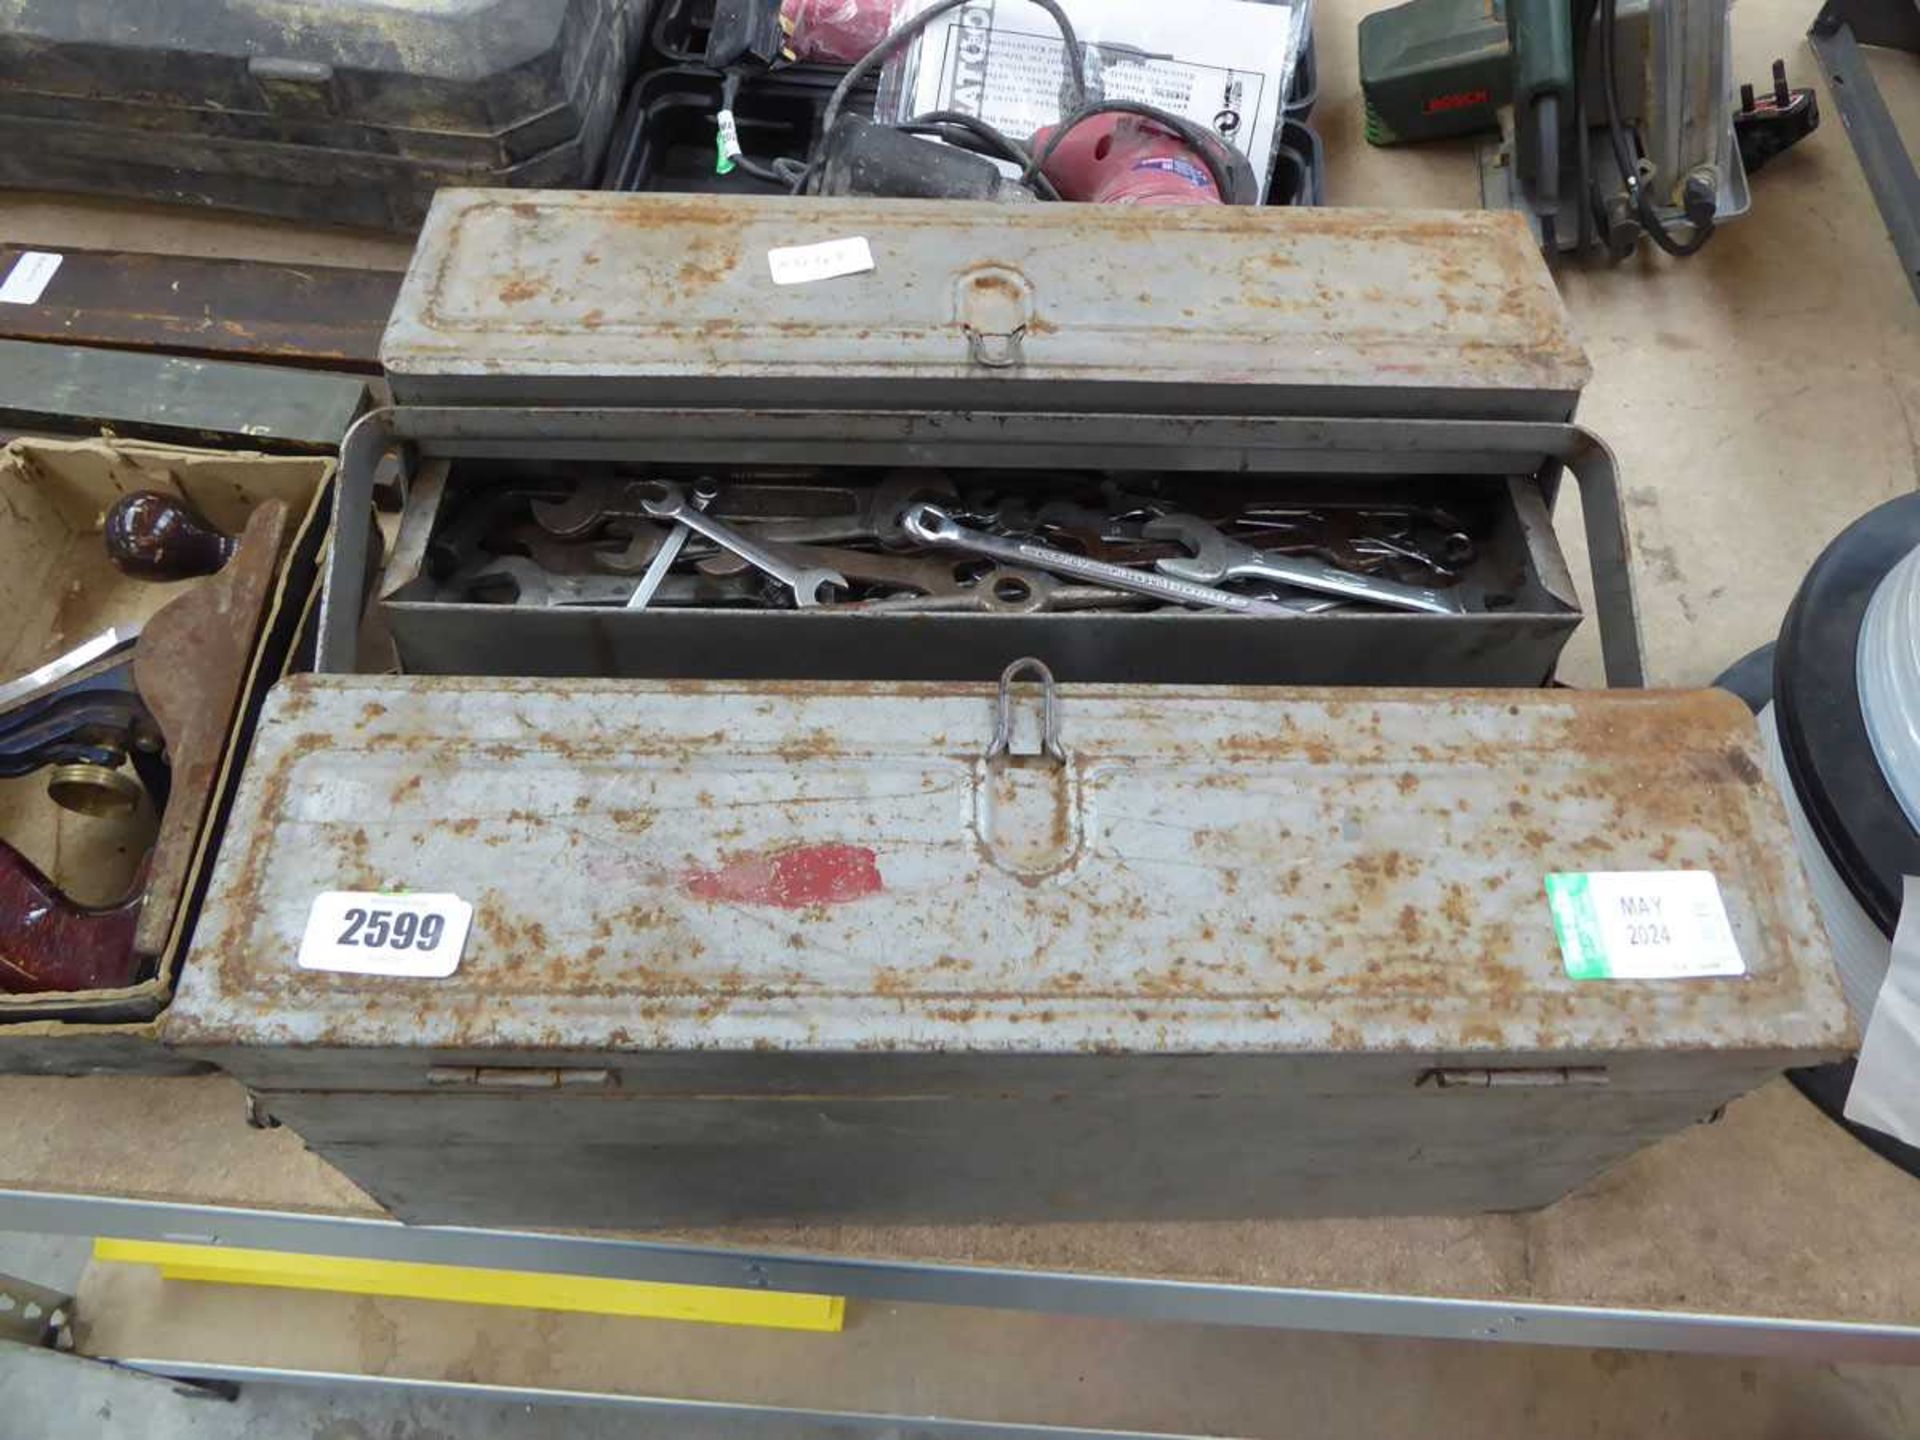 Metal expanding toolbox containing mixed tooling